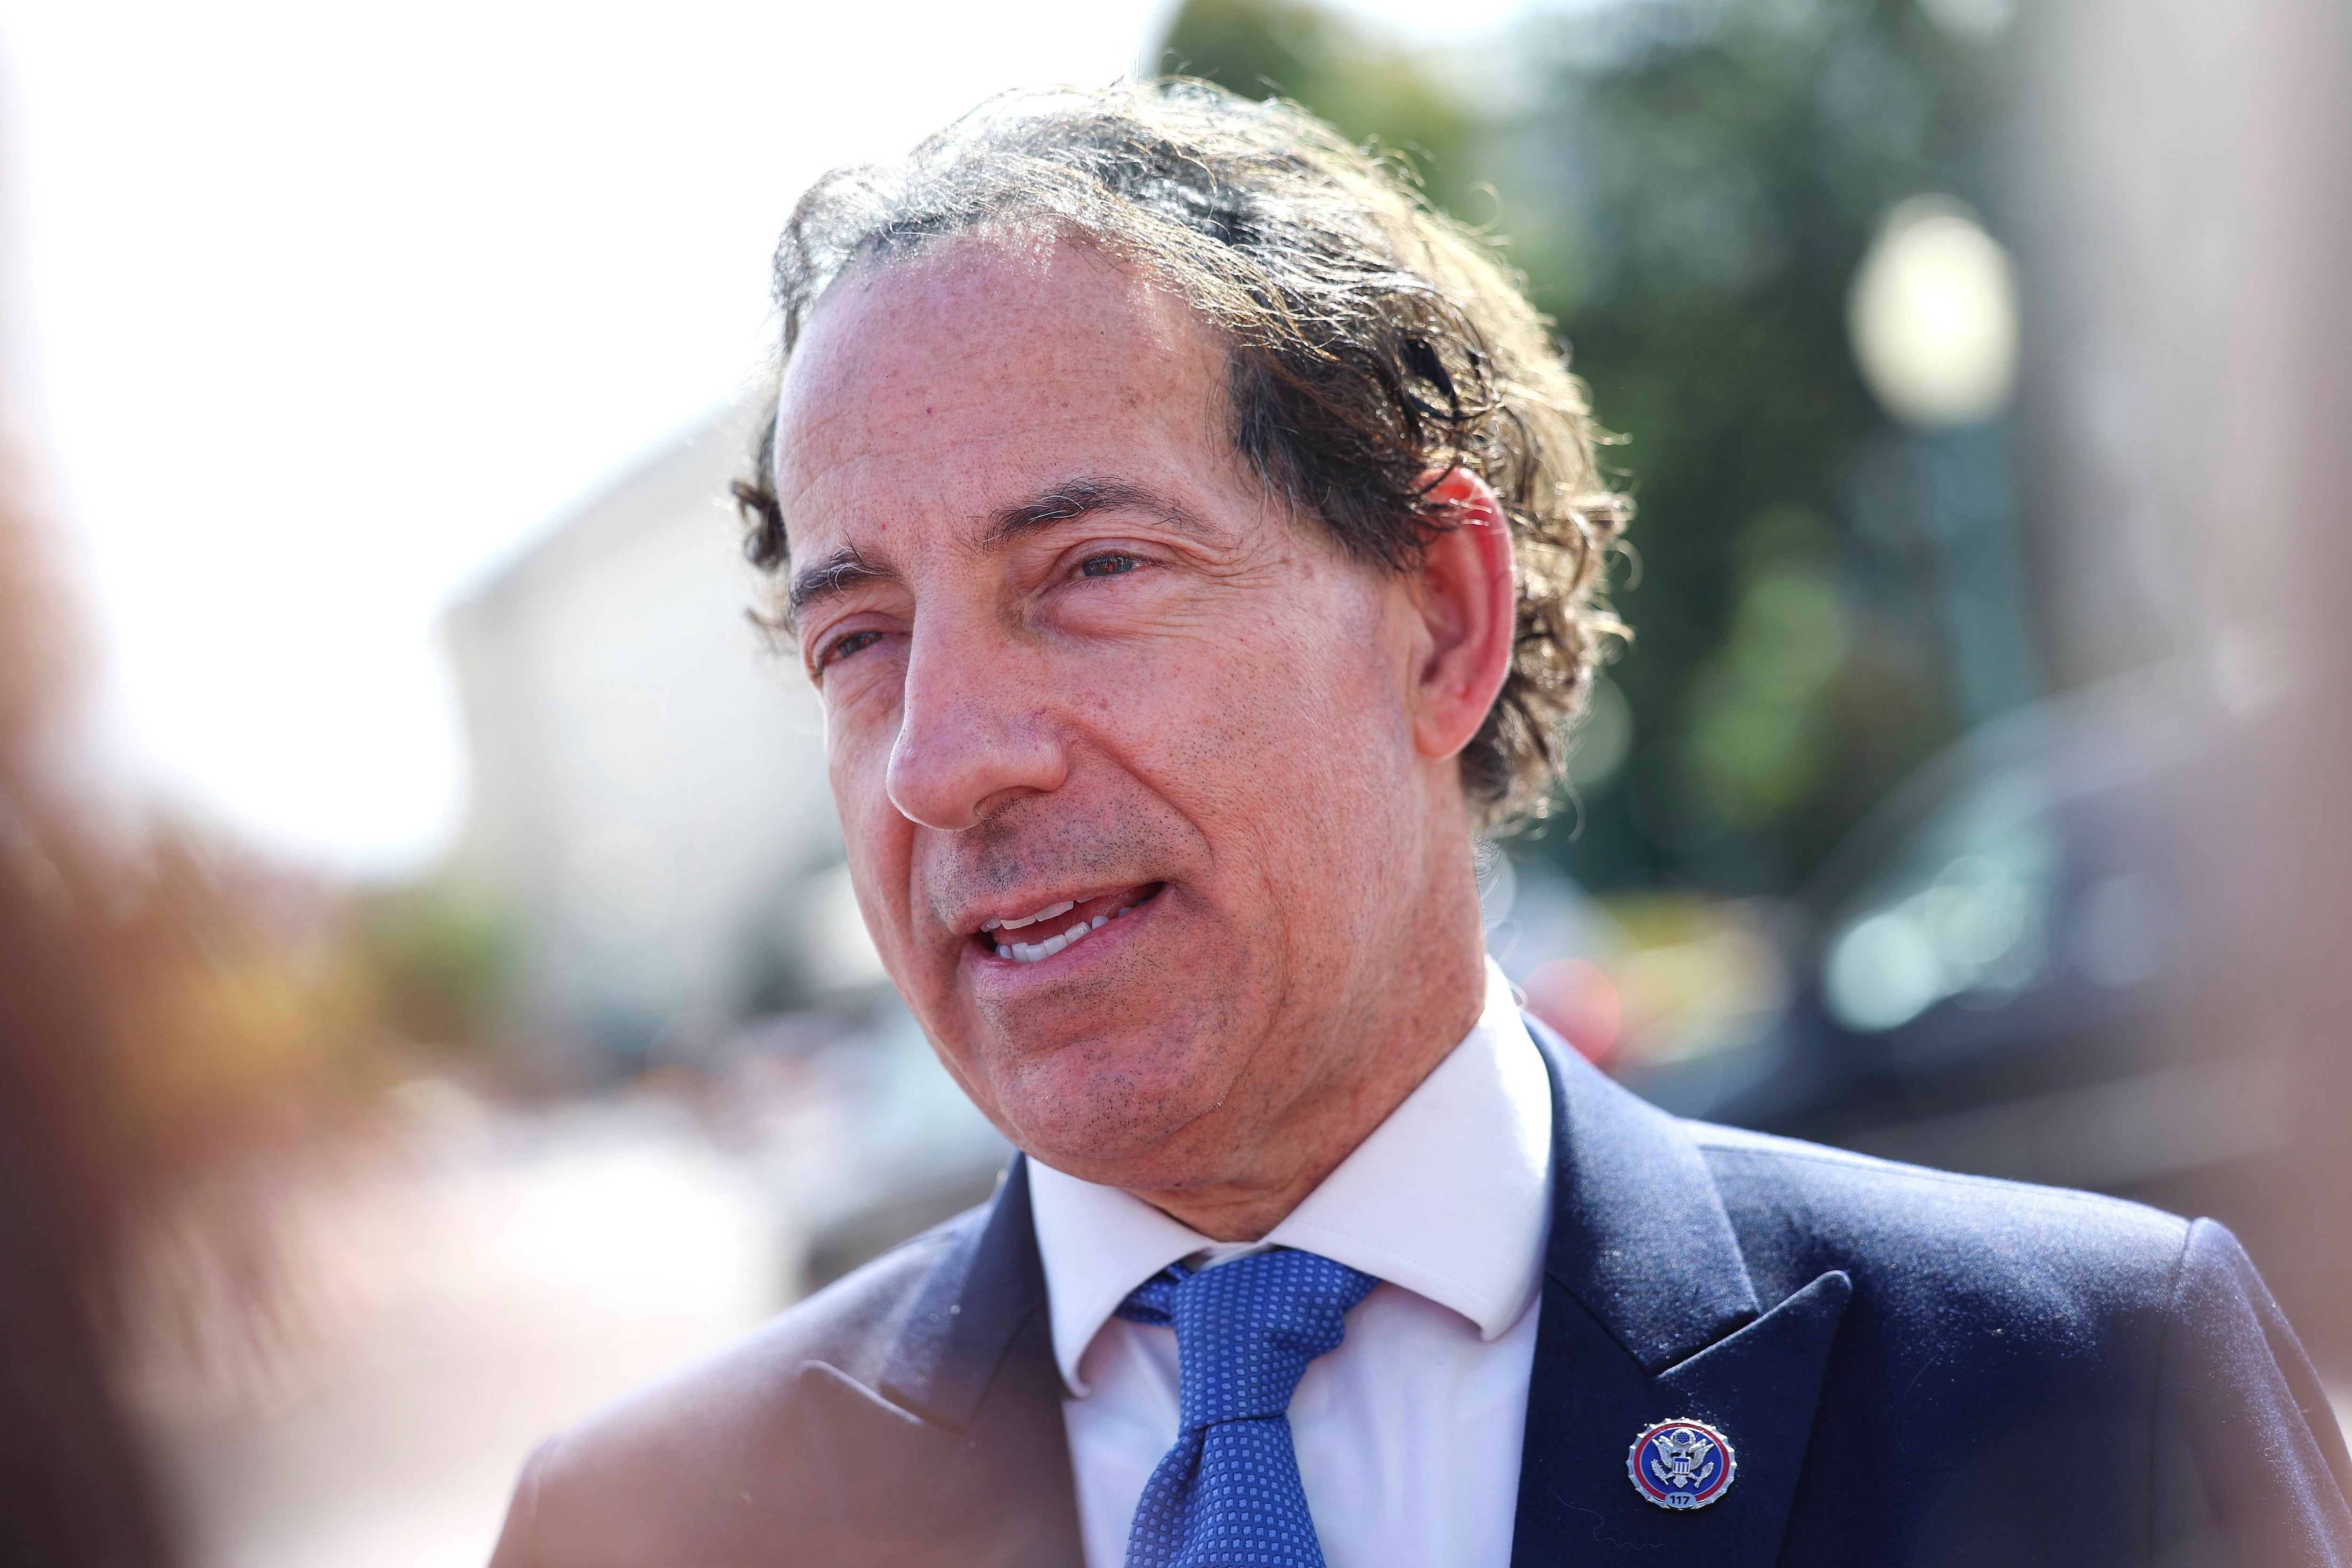 WASHINGTON, DC - SEPTEMBER 29: U.S. Rep. Jamie Raskin, member of the House Select Committee to Investigate the January 6th Attack on the U.S. Capitol, talks to members of the media outside of the U.S. Capitol, on September 29, 2022 in Washington, DC. Raskin said the committee is planning to reschedule their postponed hearing as soon as possible.